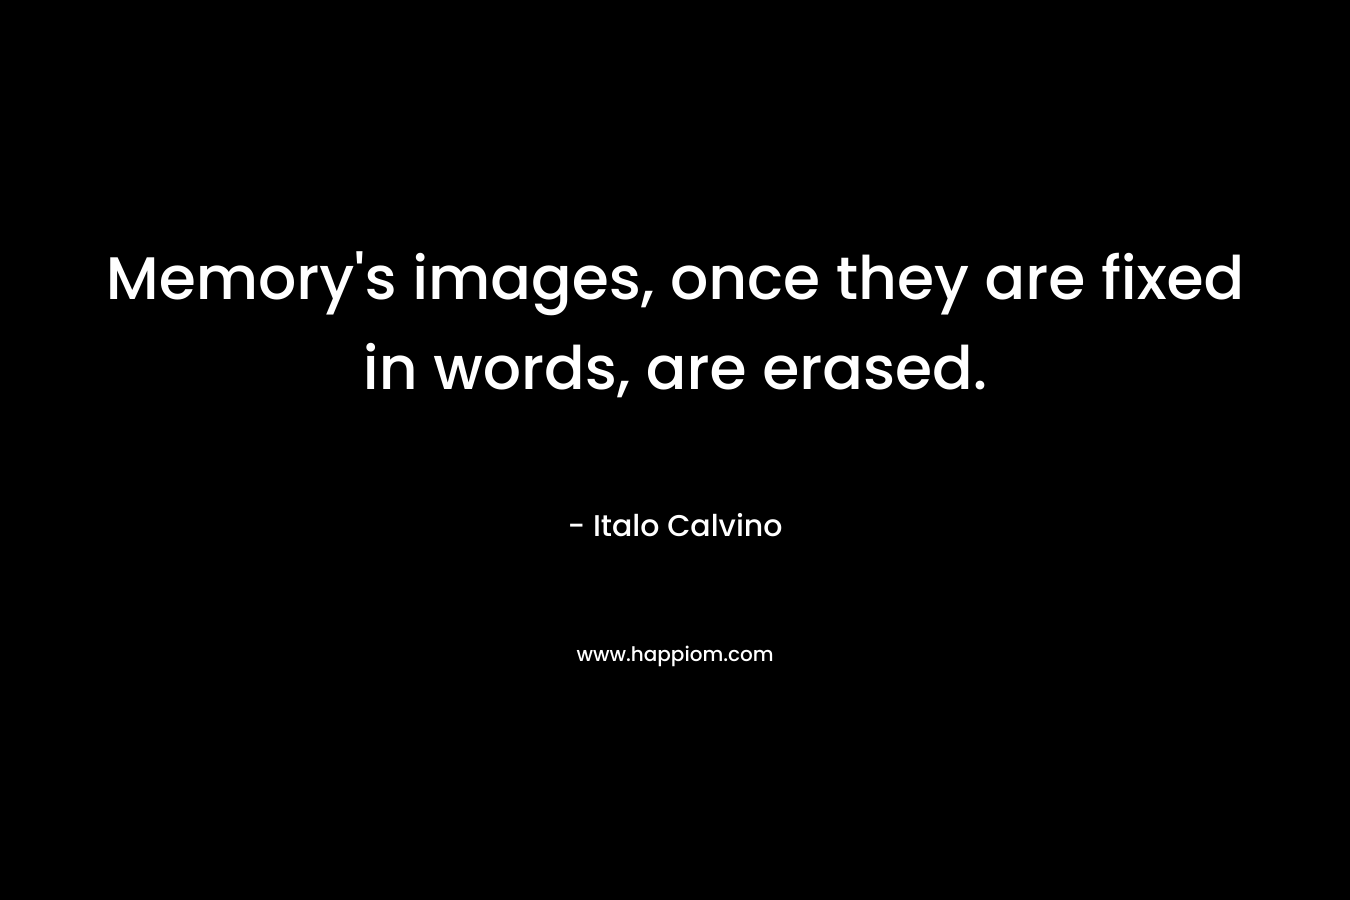 Memory’s images, once they are fixed in words, are erased. – Italo Calvino